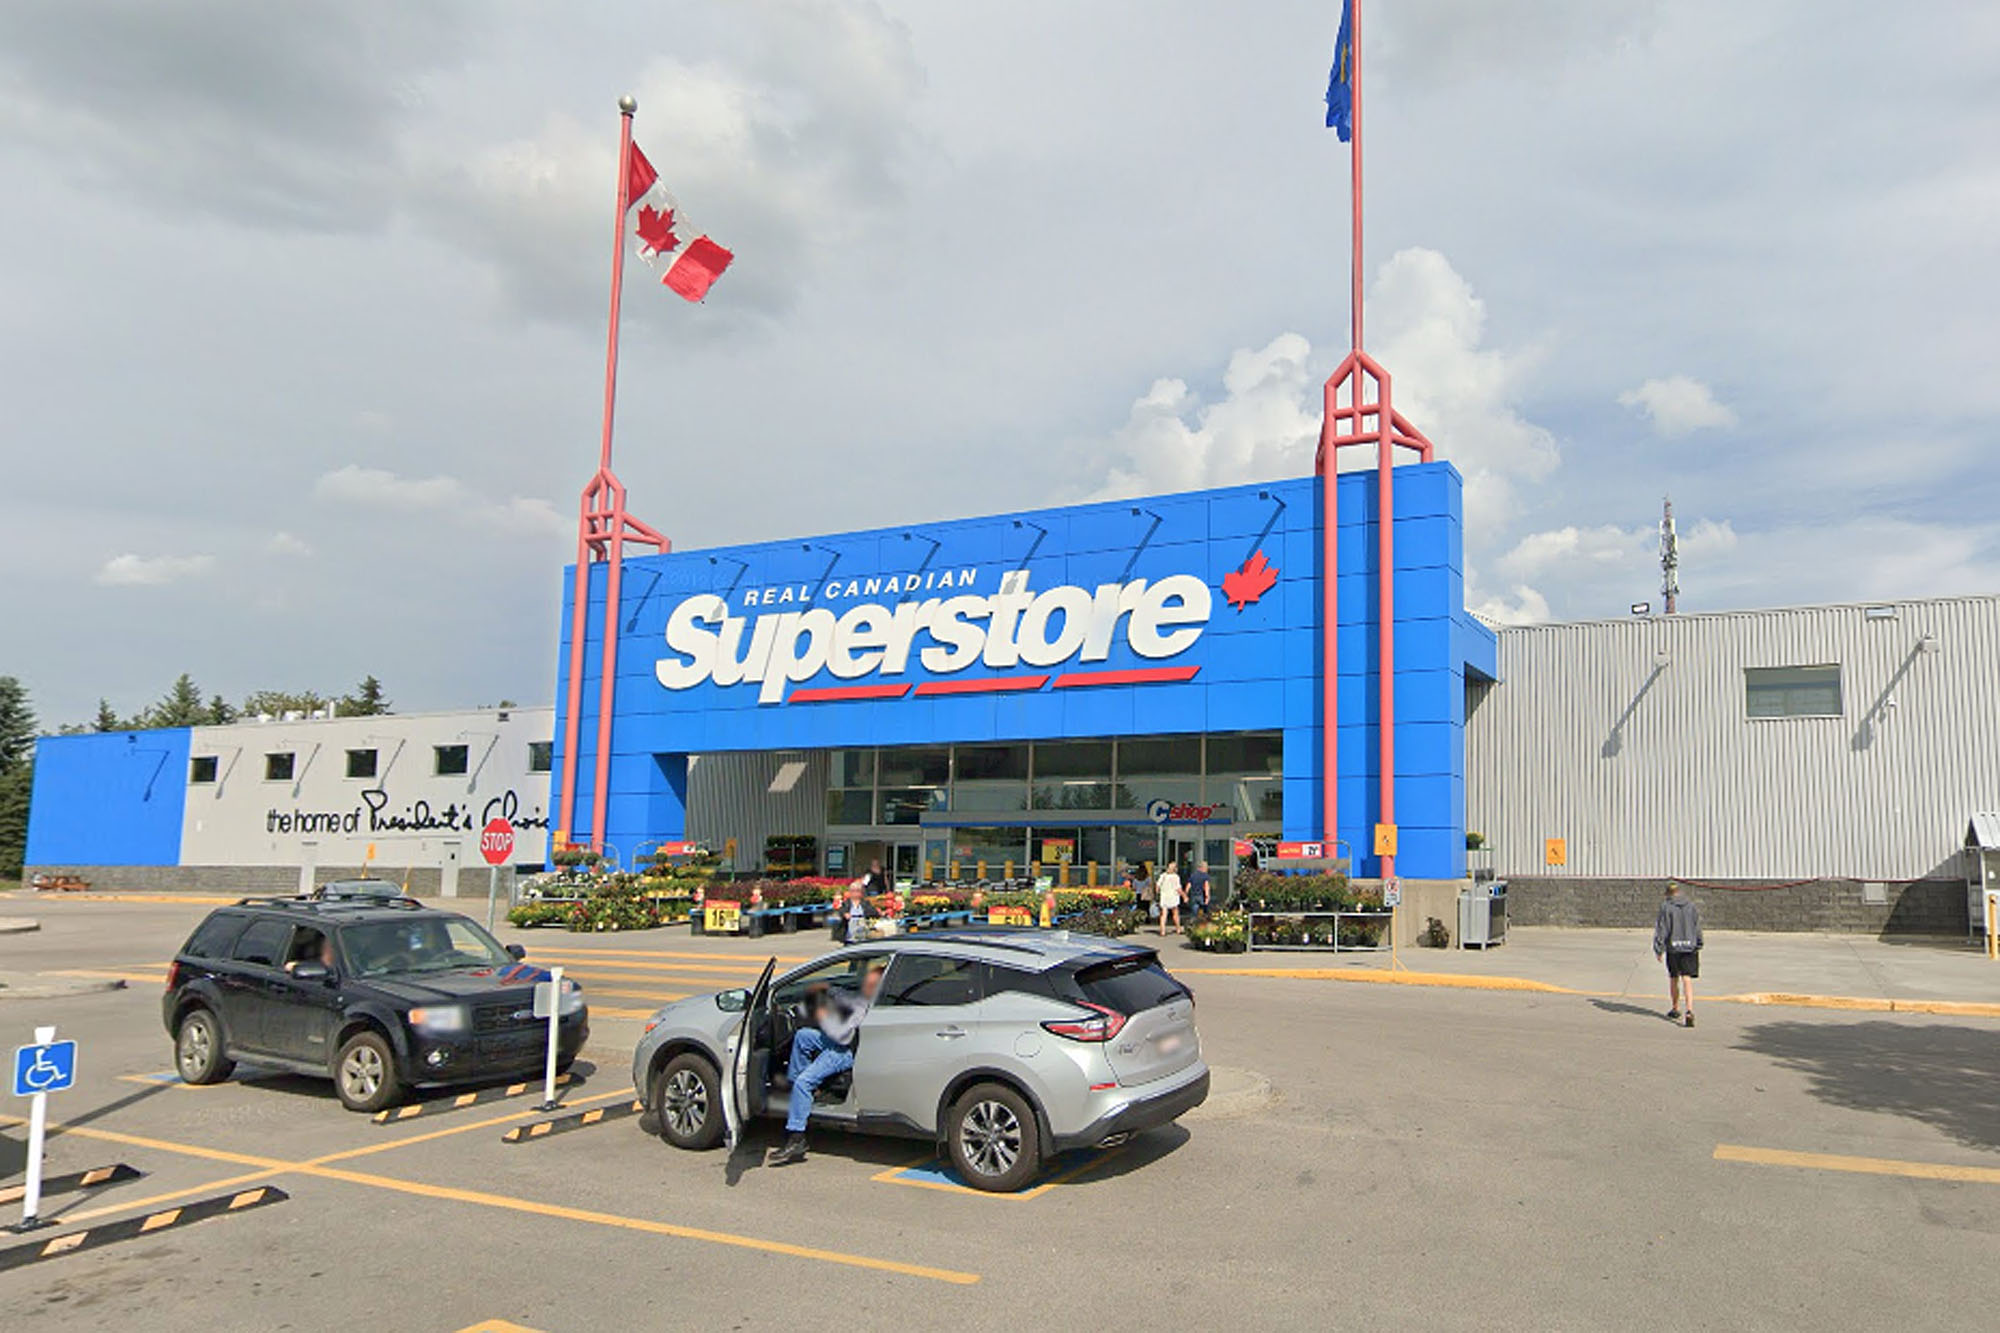 Superstore staff member tests positive for COVID-19